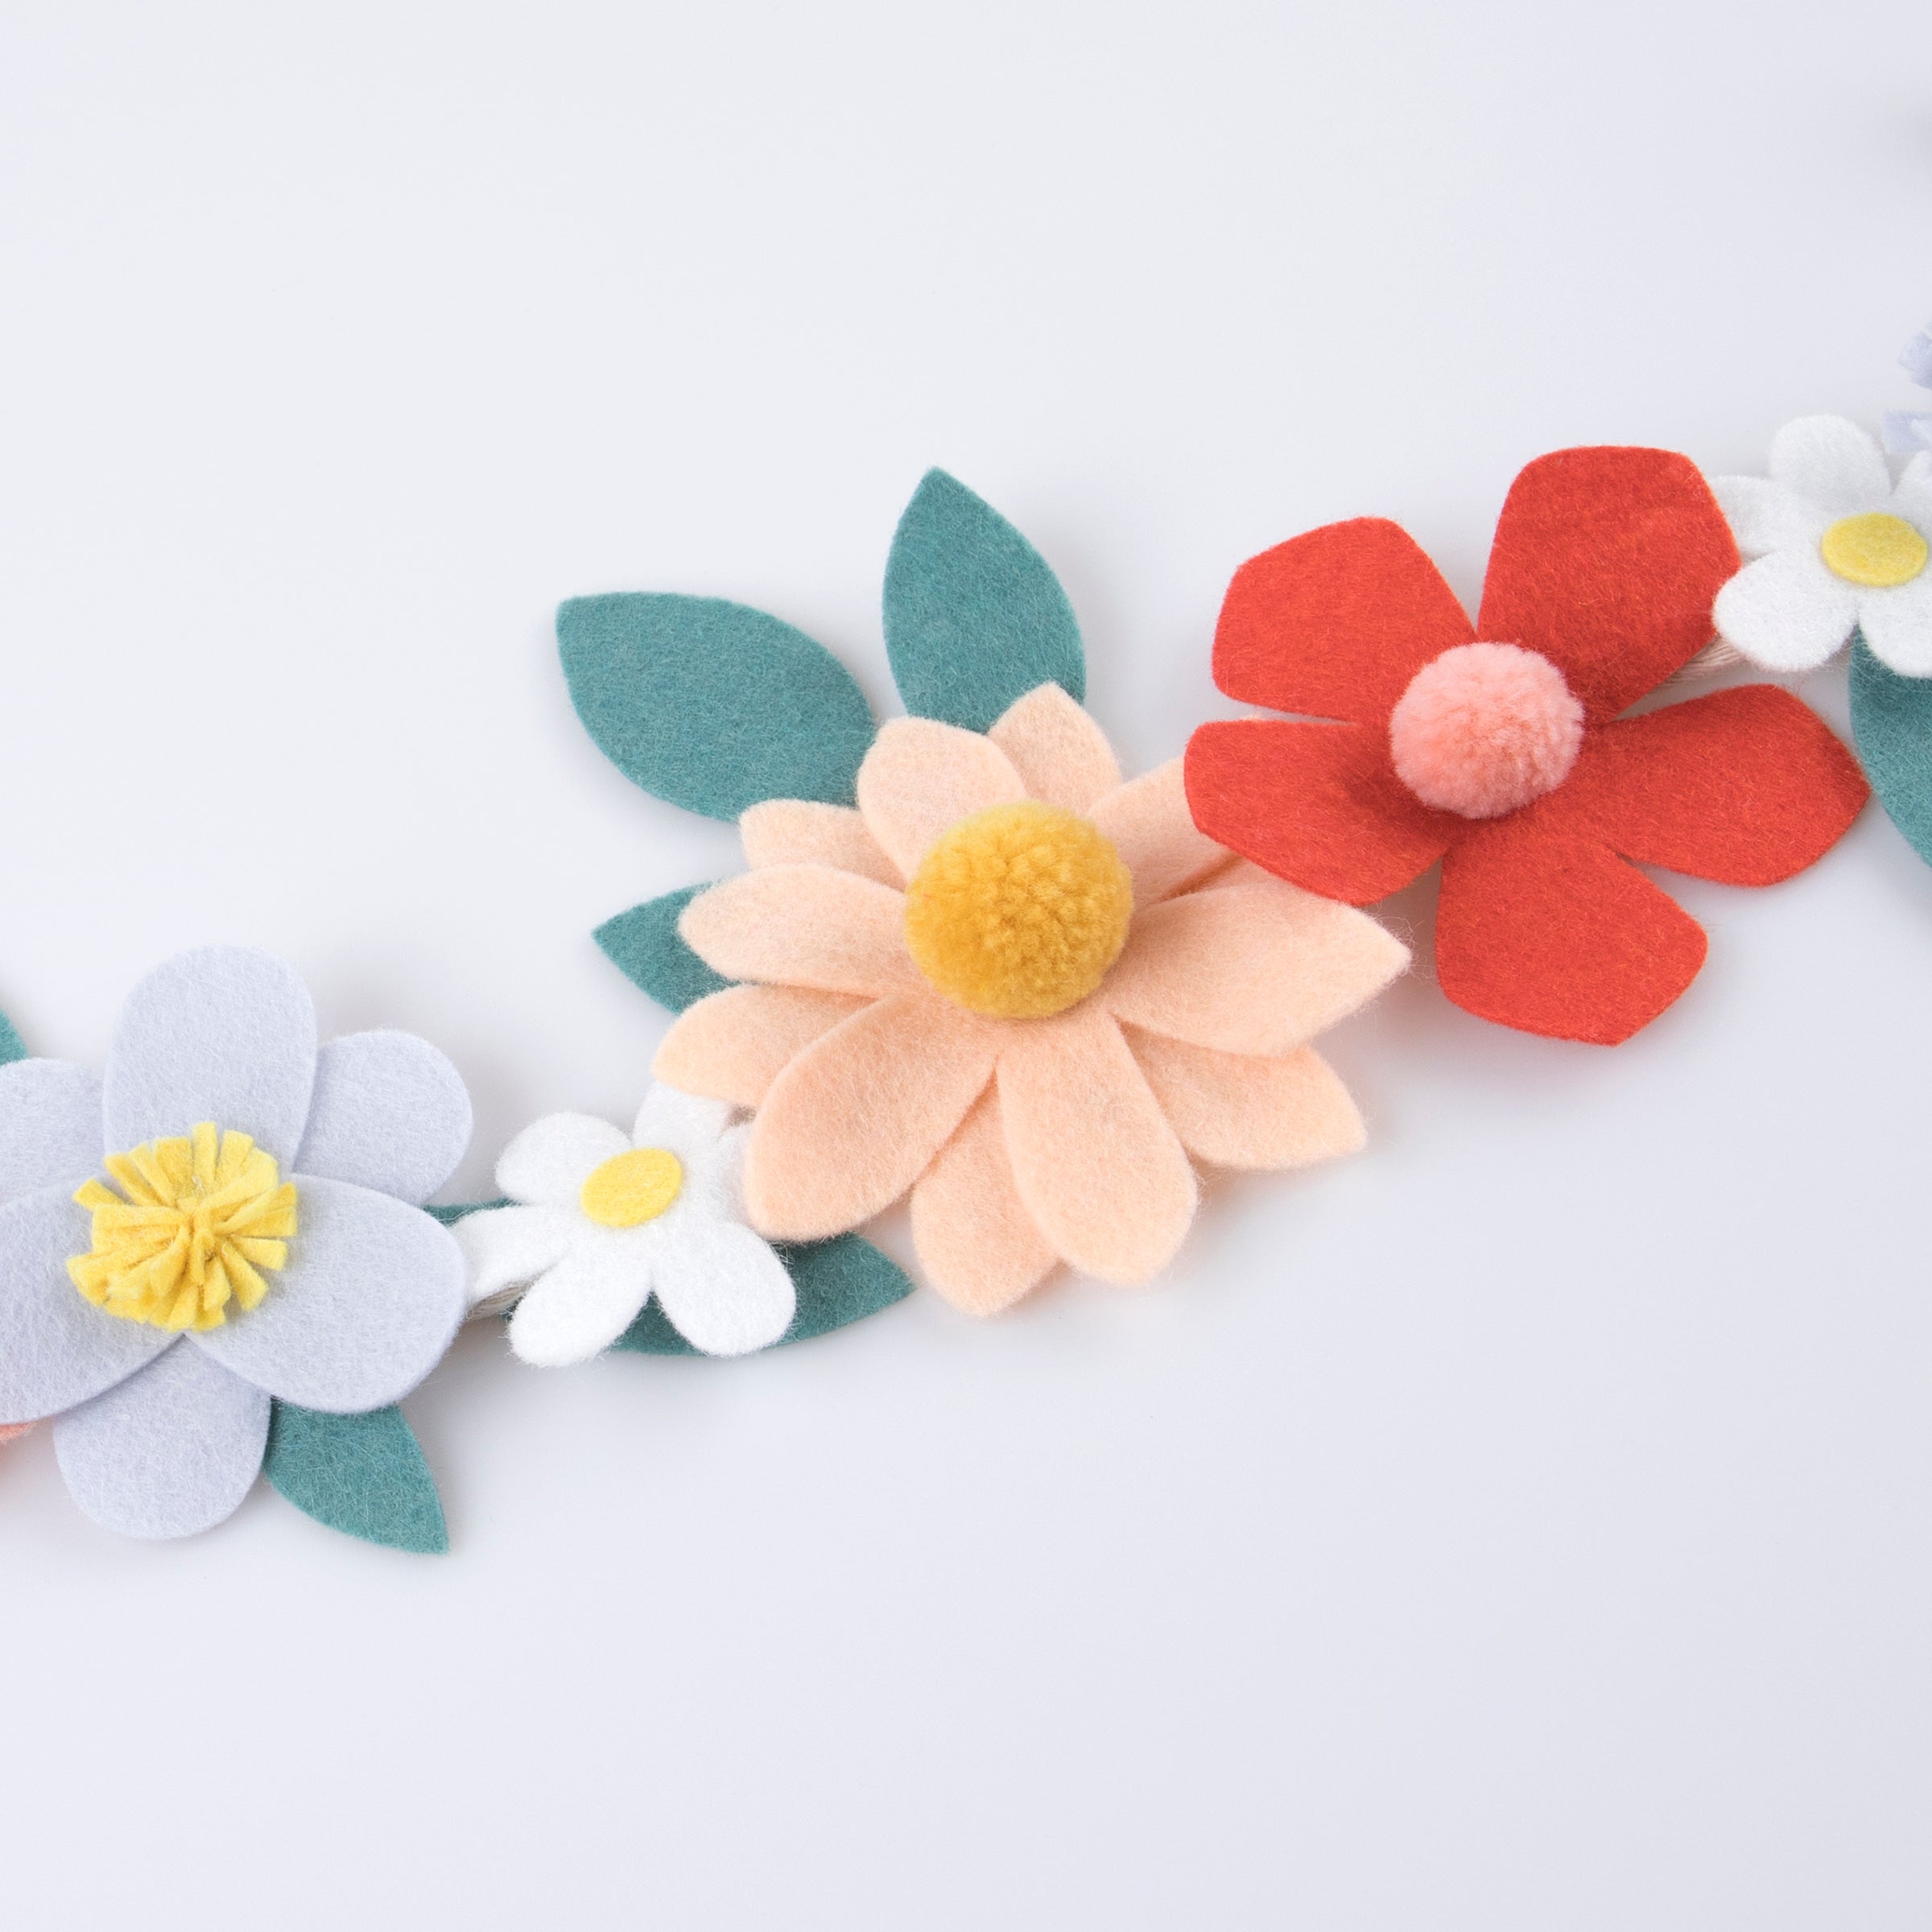 Our special party garland is crafted from felt, with flowers with pompom centers.